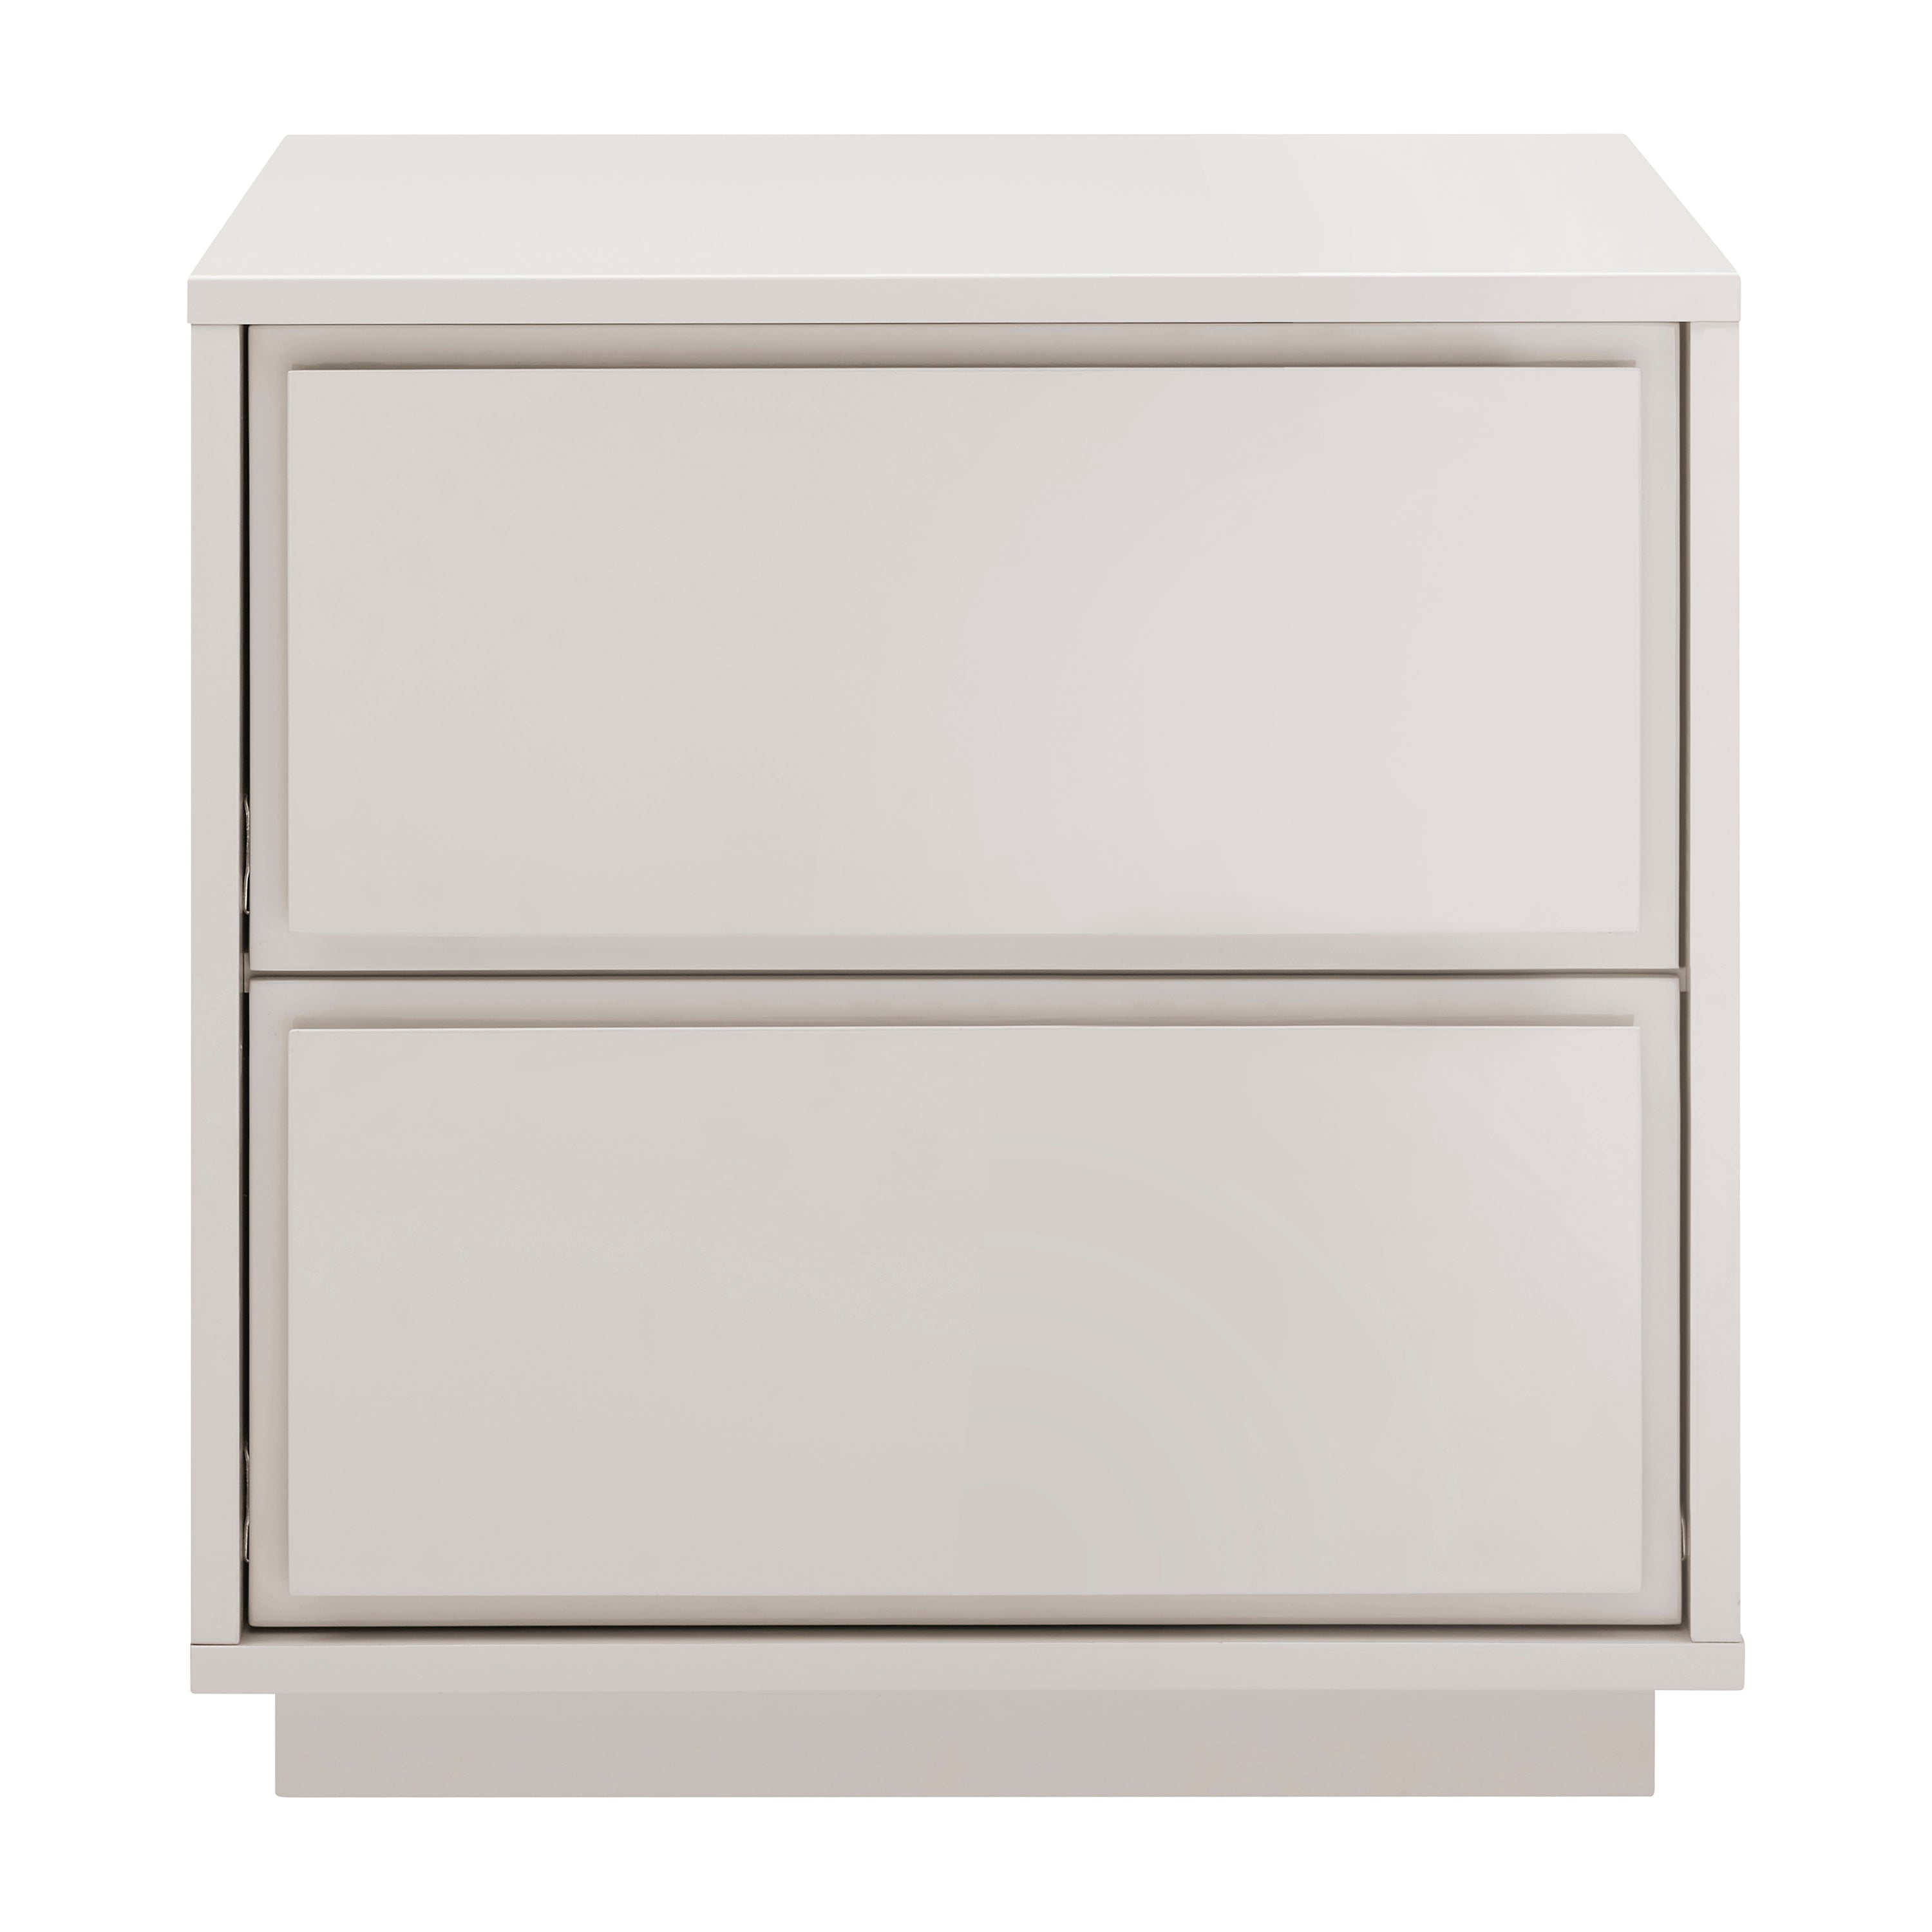 Euro Style Nightstands & Side Tables - Tresero Nightstand in High Gloss Warm Gray